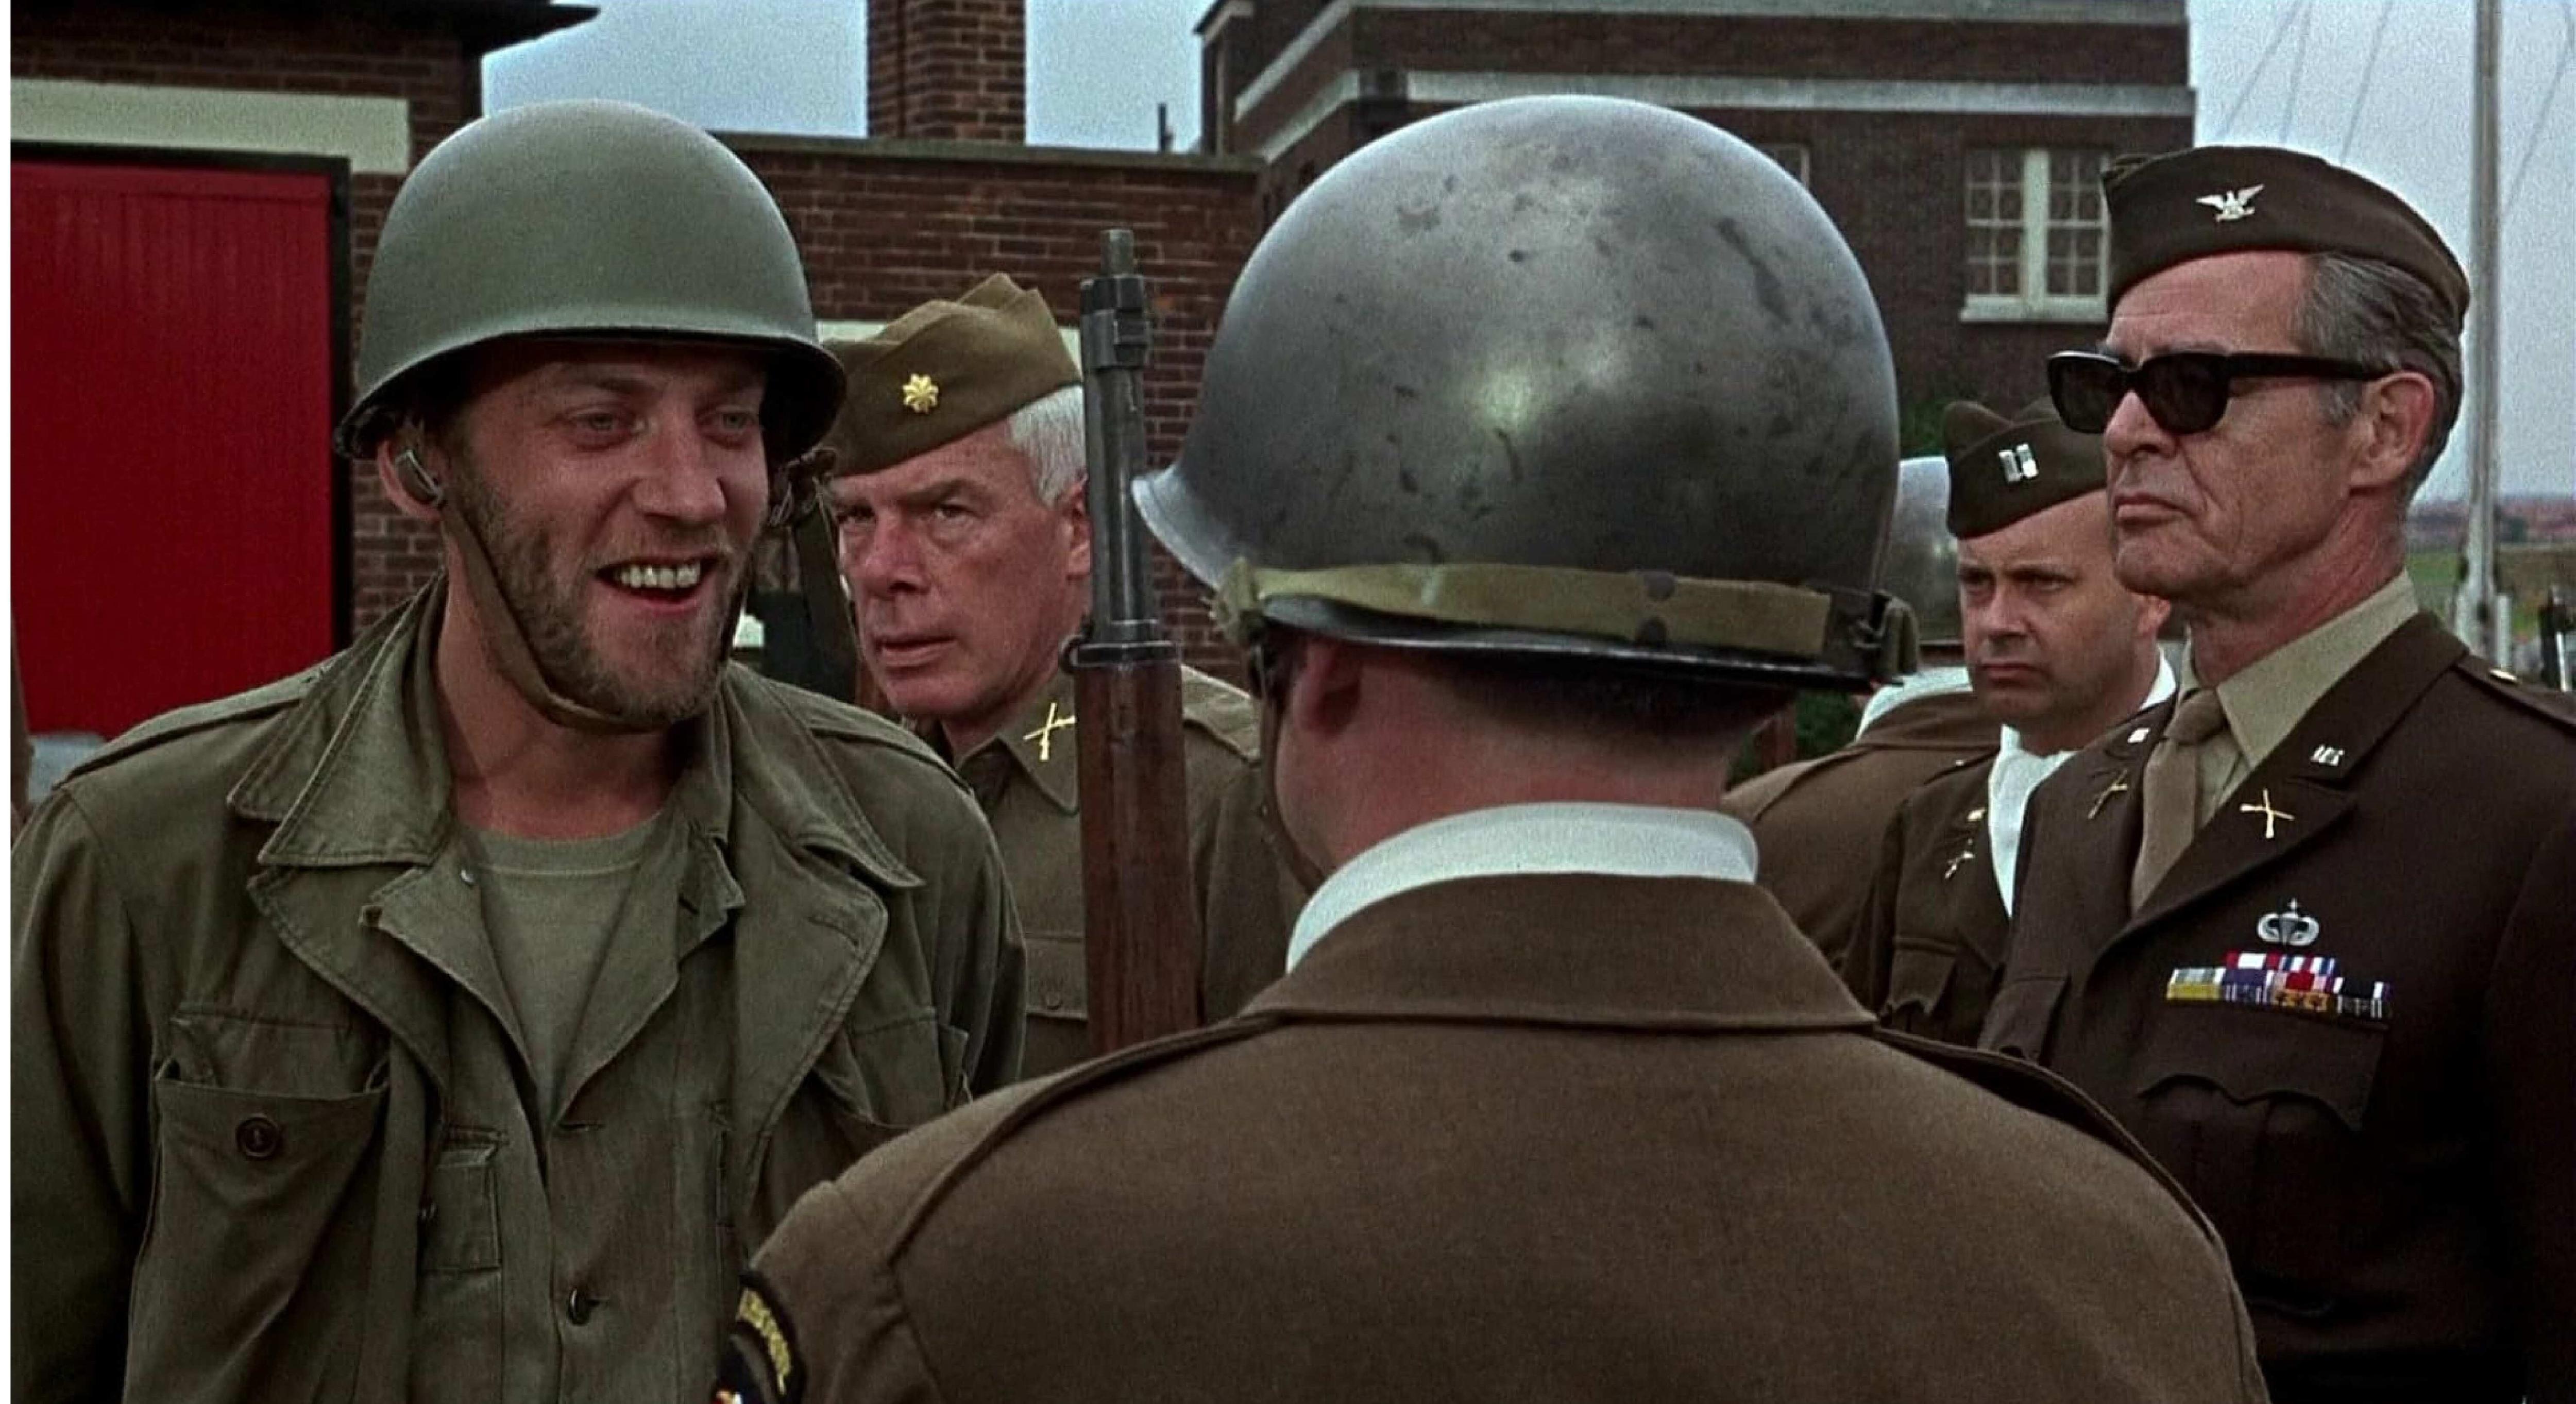 Donald Sutherland in an army outfit surrounded by commanders in the movie The Dirty Dozen